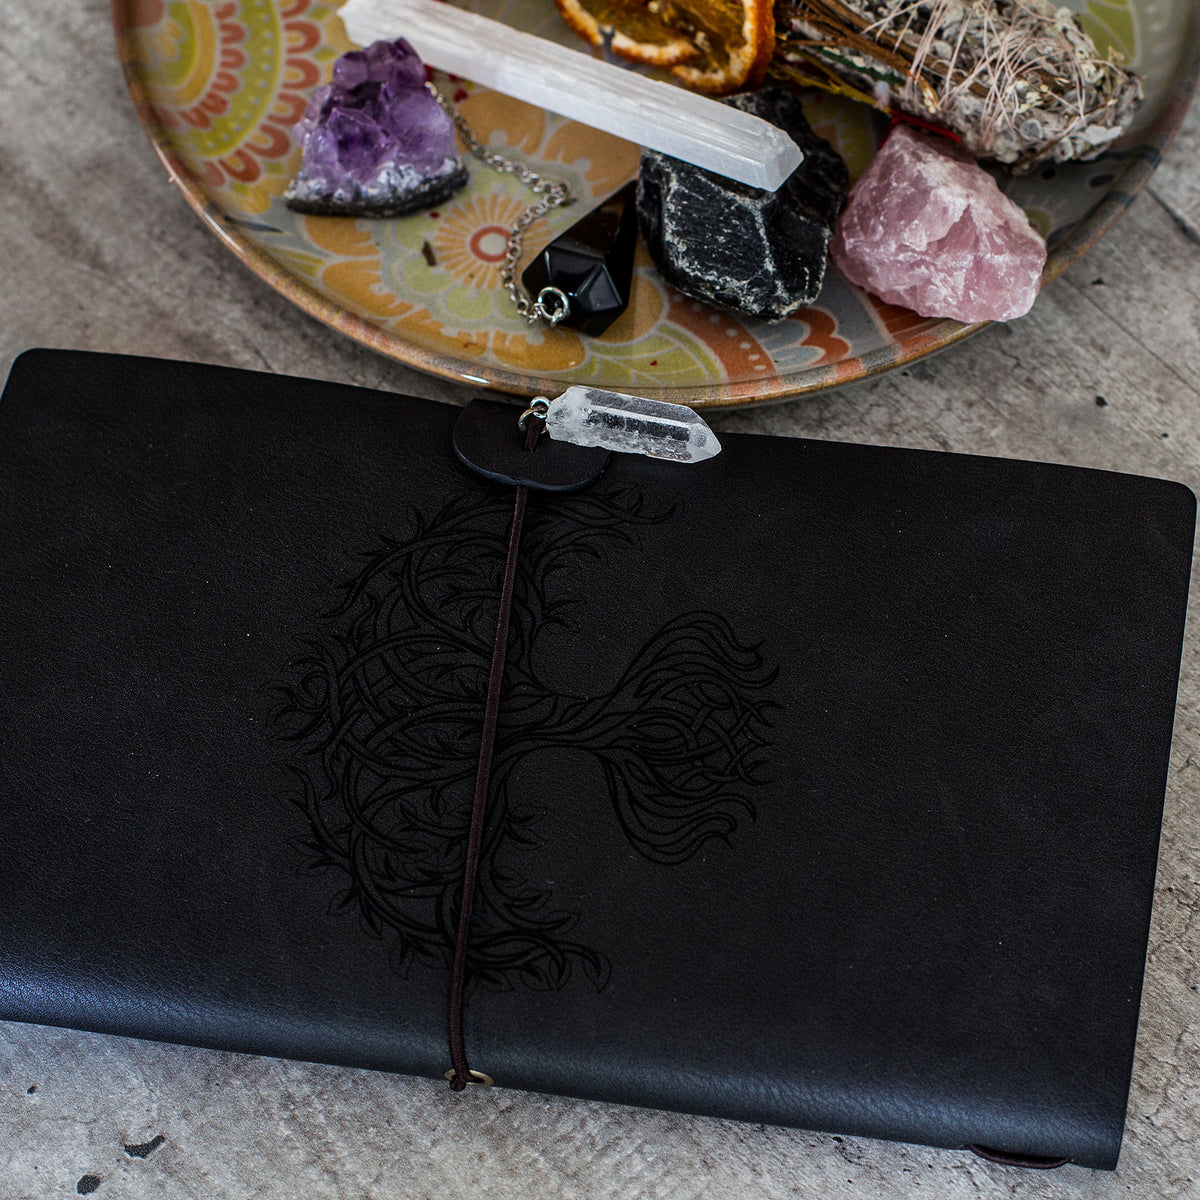 Manifestation Journal - Tree of Life (Black Leather) - Capture your thoughts and ambitions in this elegant leather journal complete with an elastic band and a hanging crystal to manifest your ideal life.